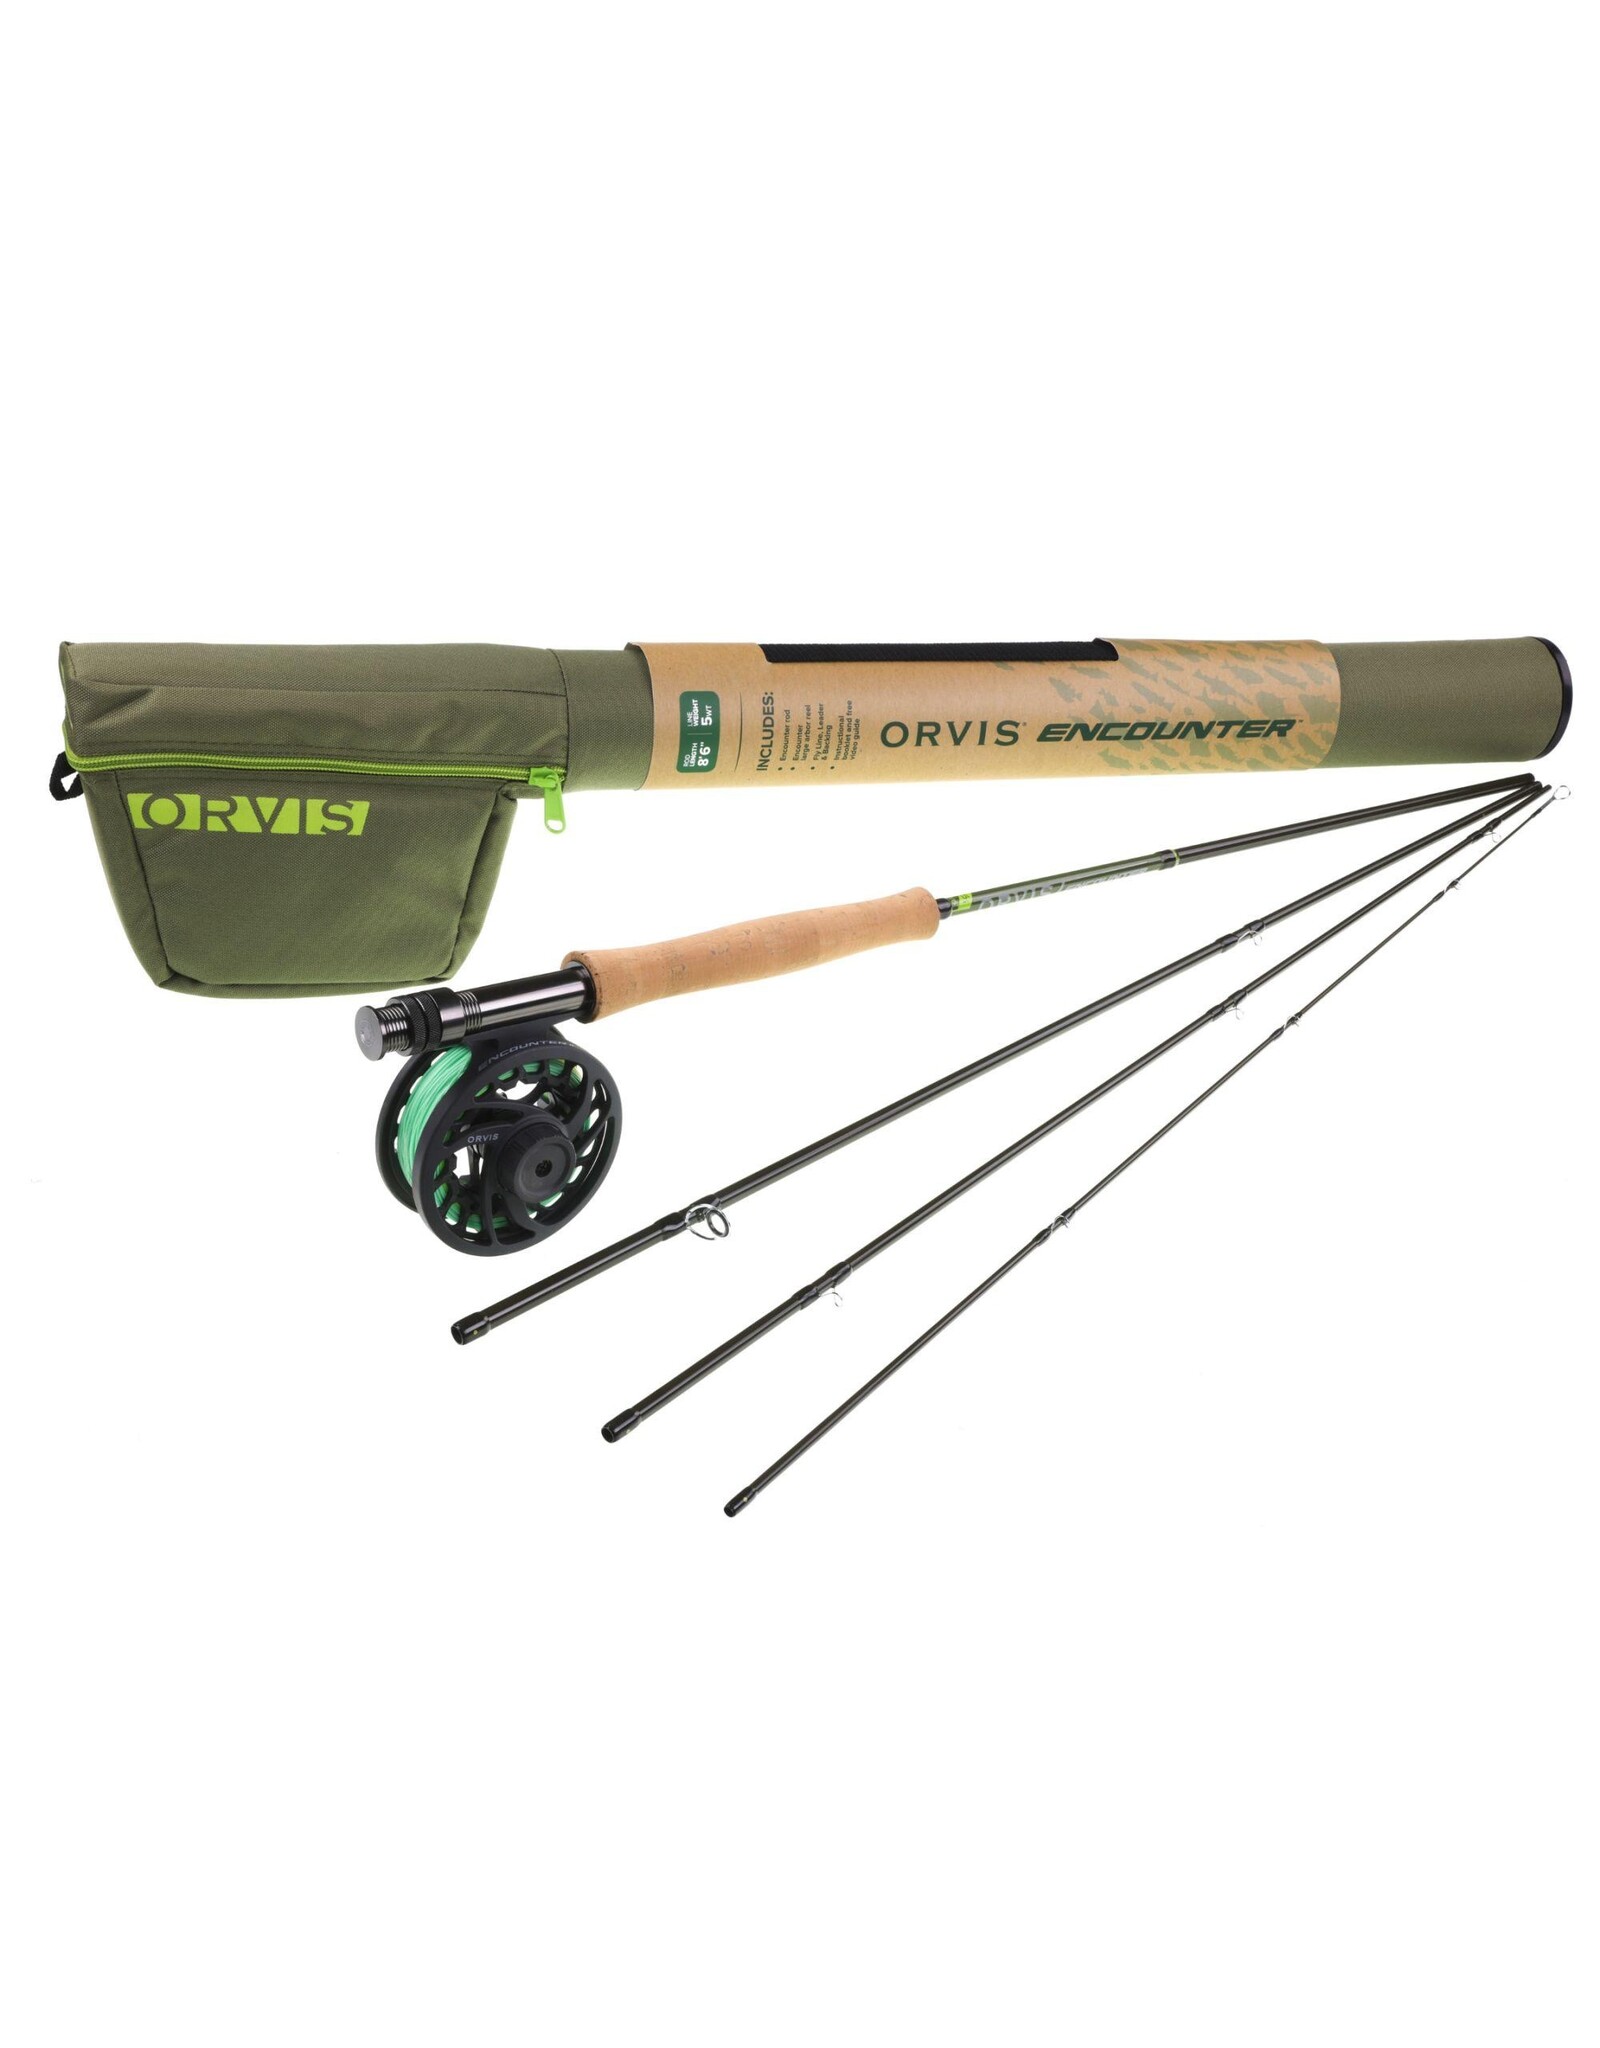 Orvis NEW Orvis Encounter Outfit 9' 5wt